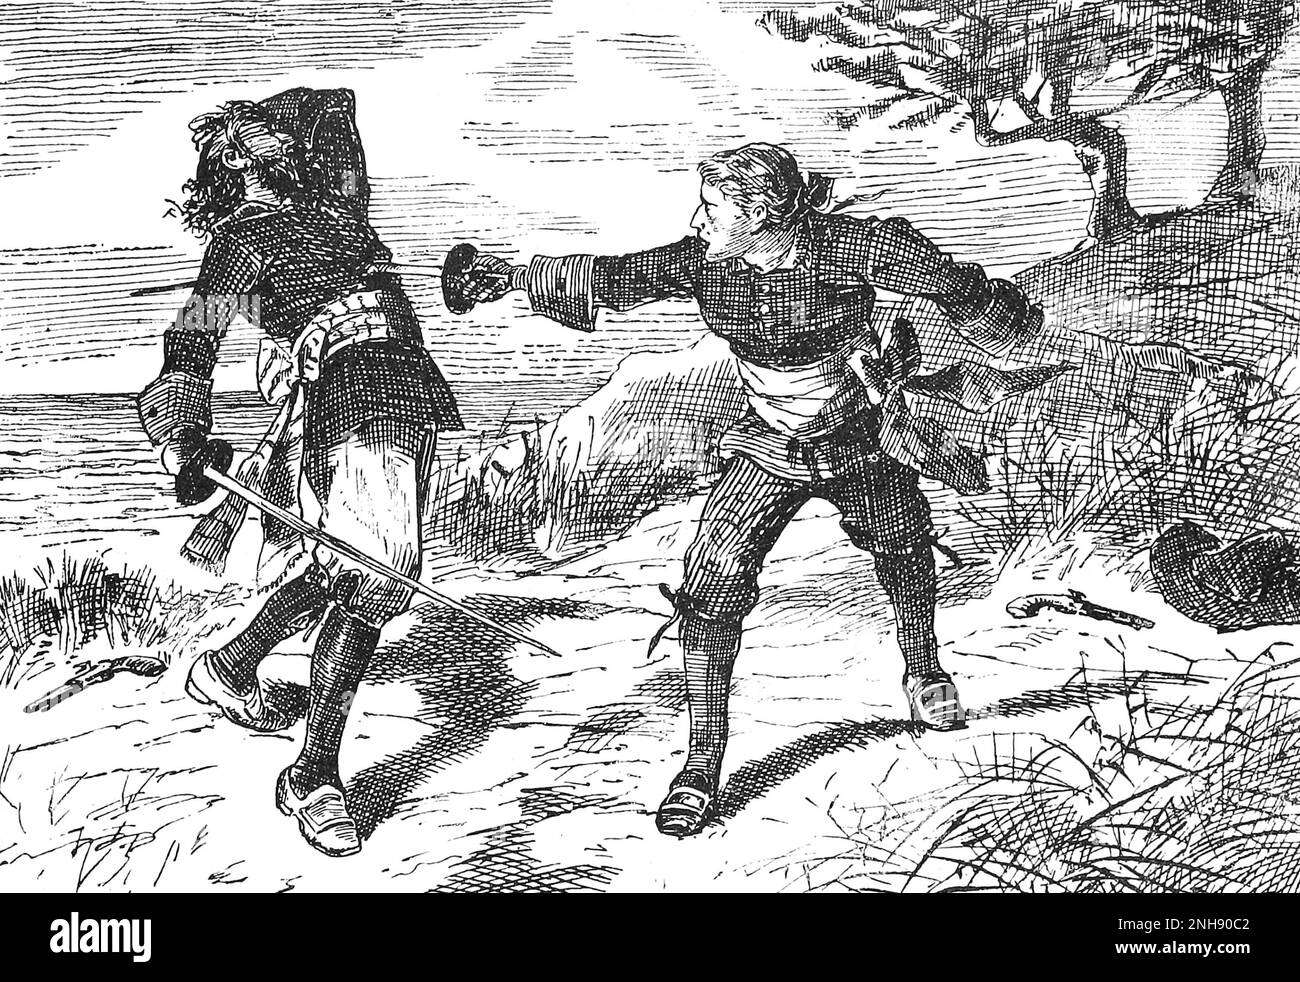 Irish pirate Anne Bonny (1697-1721) disguised as a man, killing another sailor in a duel. Illustration John Abbott, 1874. Stock Photo